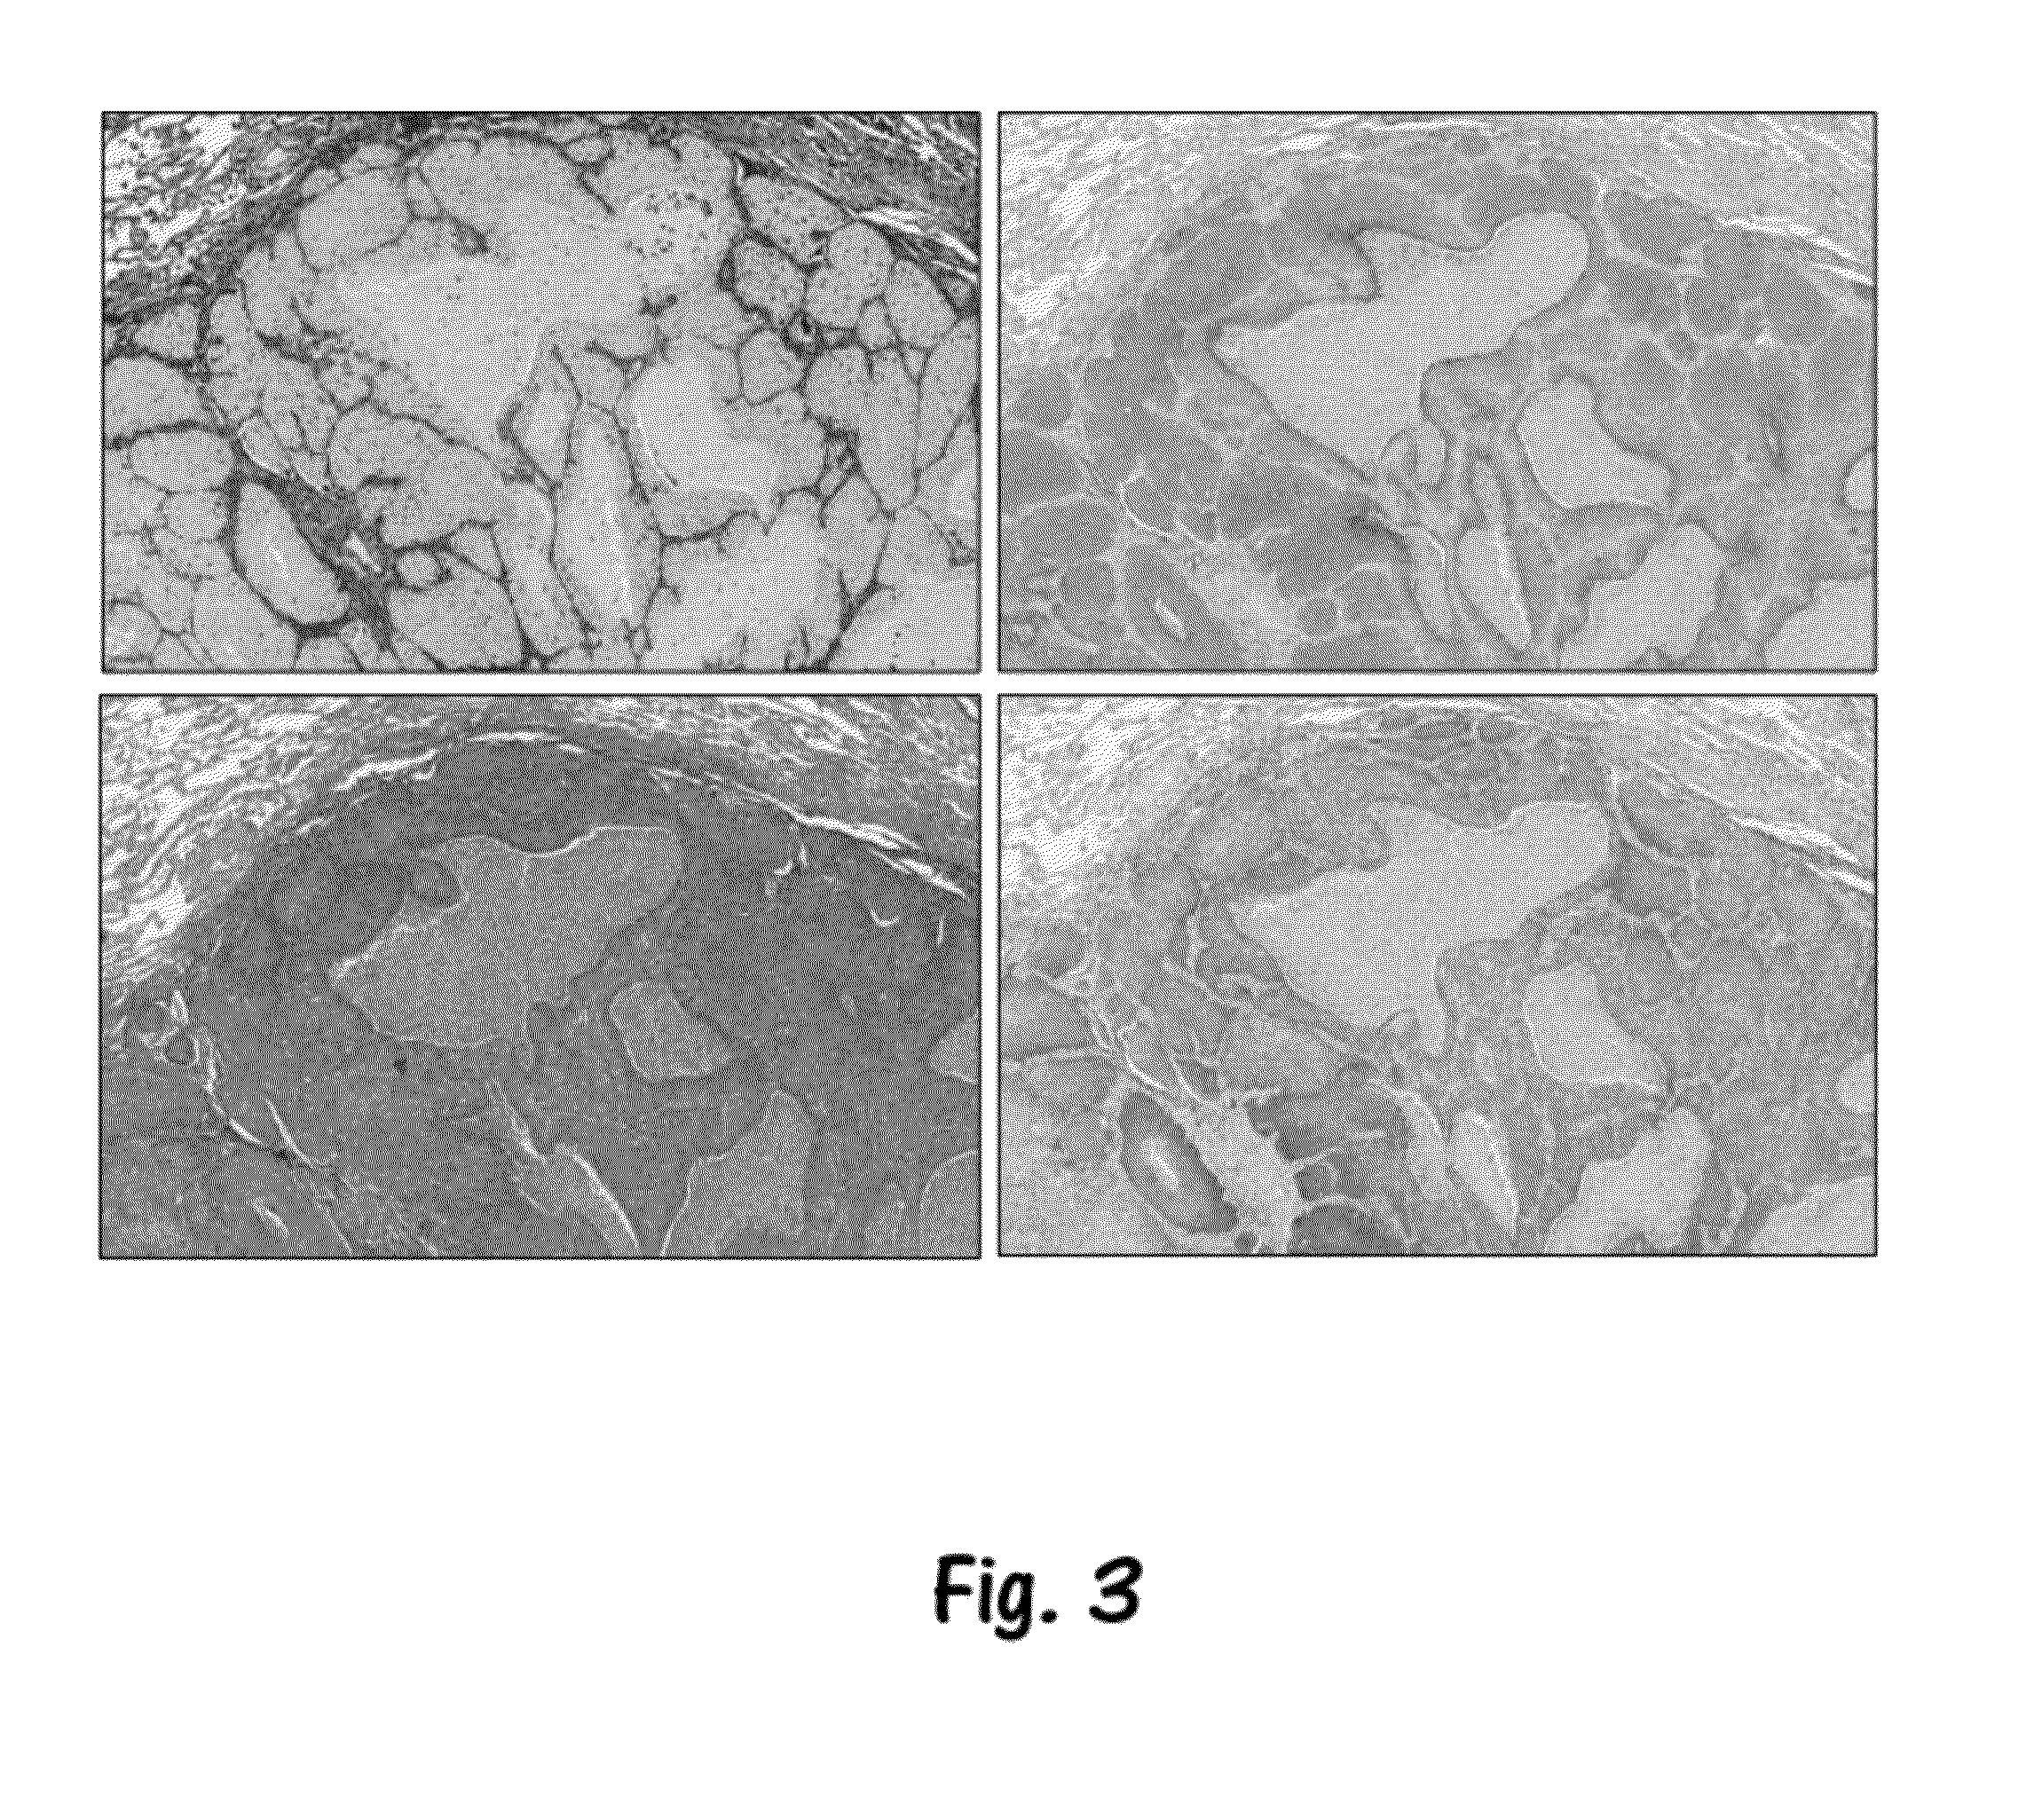 Methods for feature analysis on consecutive tissue sections